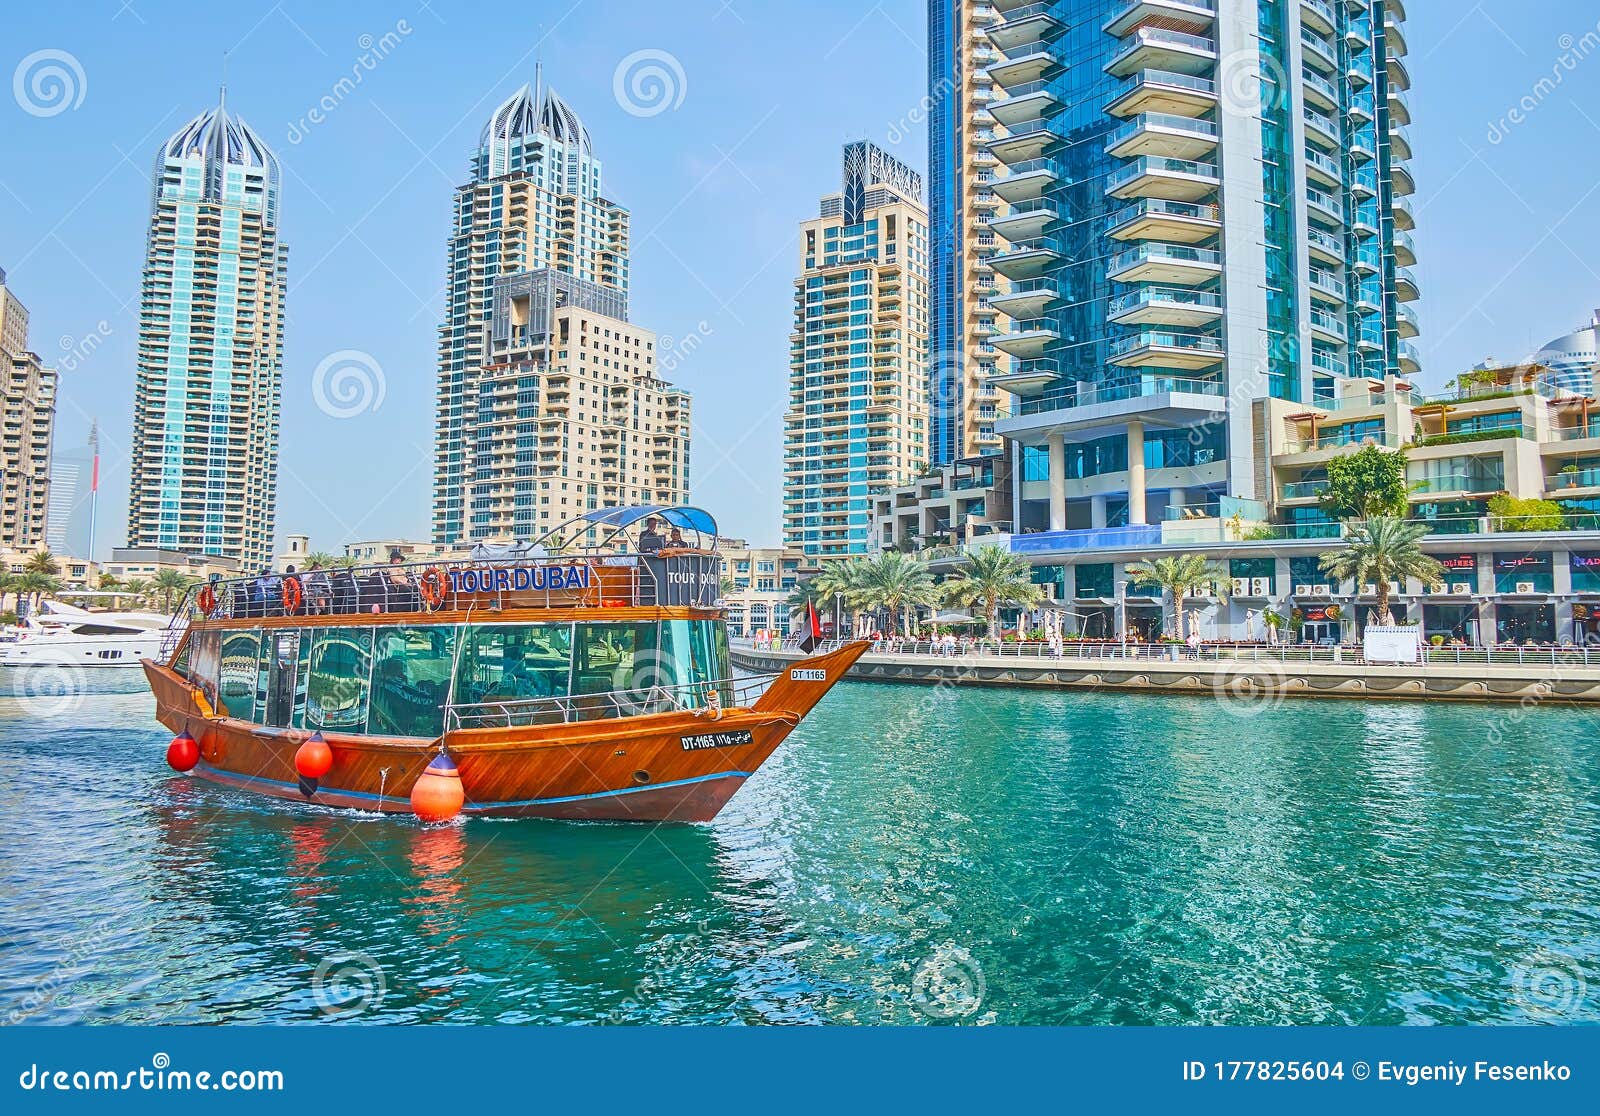 Traditional dhow boat in Dubai Marina, UAE. DUBAI, UAE - MARCH 2, 2020: Enjoy dhow boat cruise along the modern Dubai Marina, surrounded by luxury living skyscrapers, cozy cafes, restaurants and yacht clubs, on March 2 in Dubai